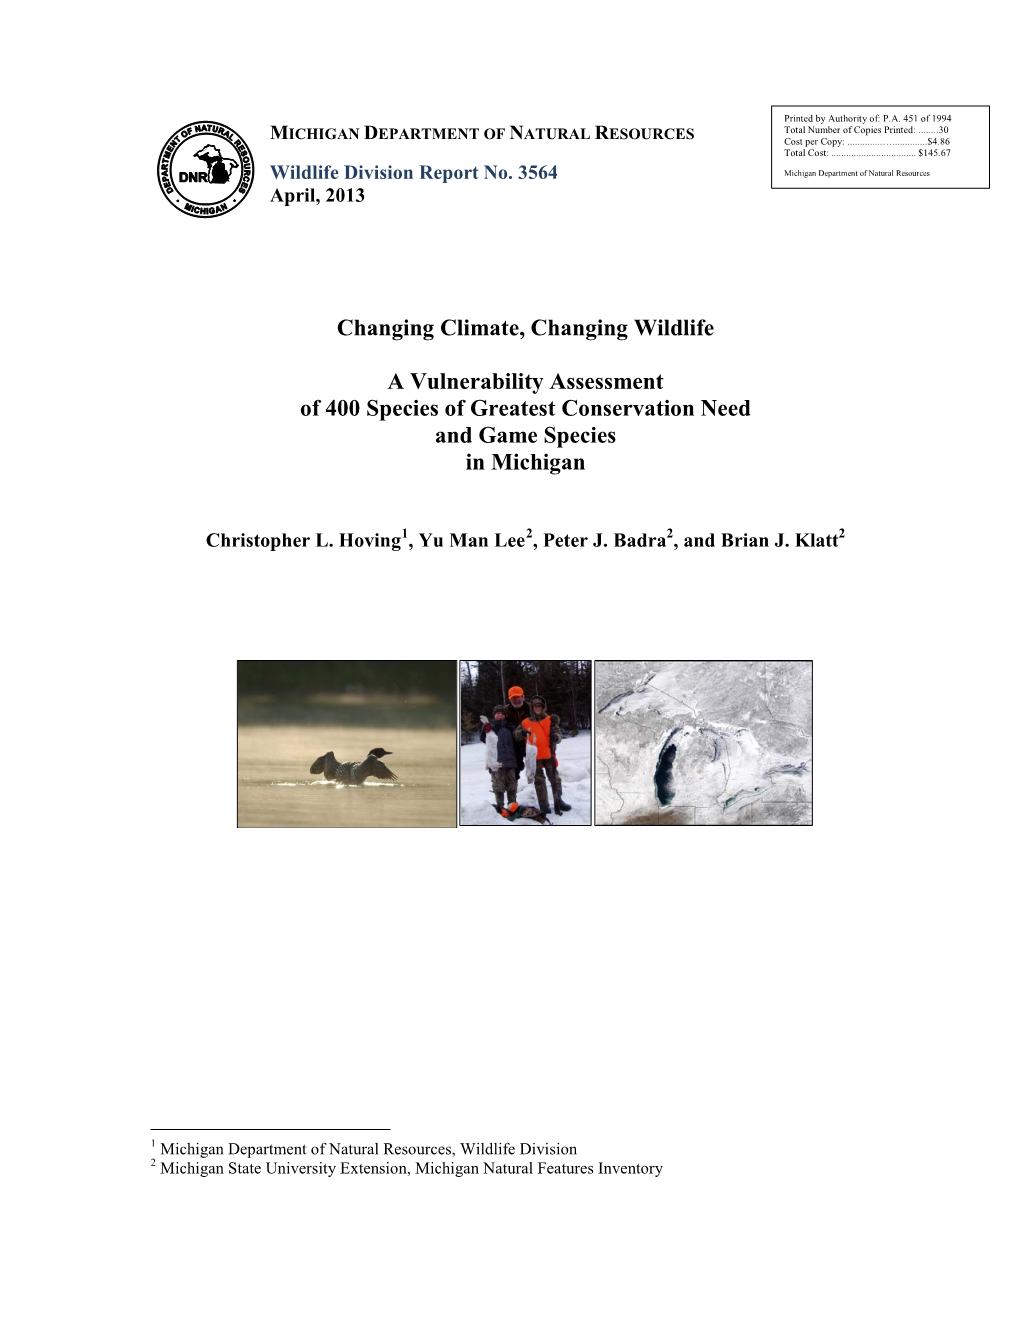 Changing Climate, Changing Wildlife